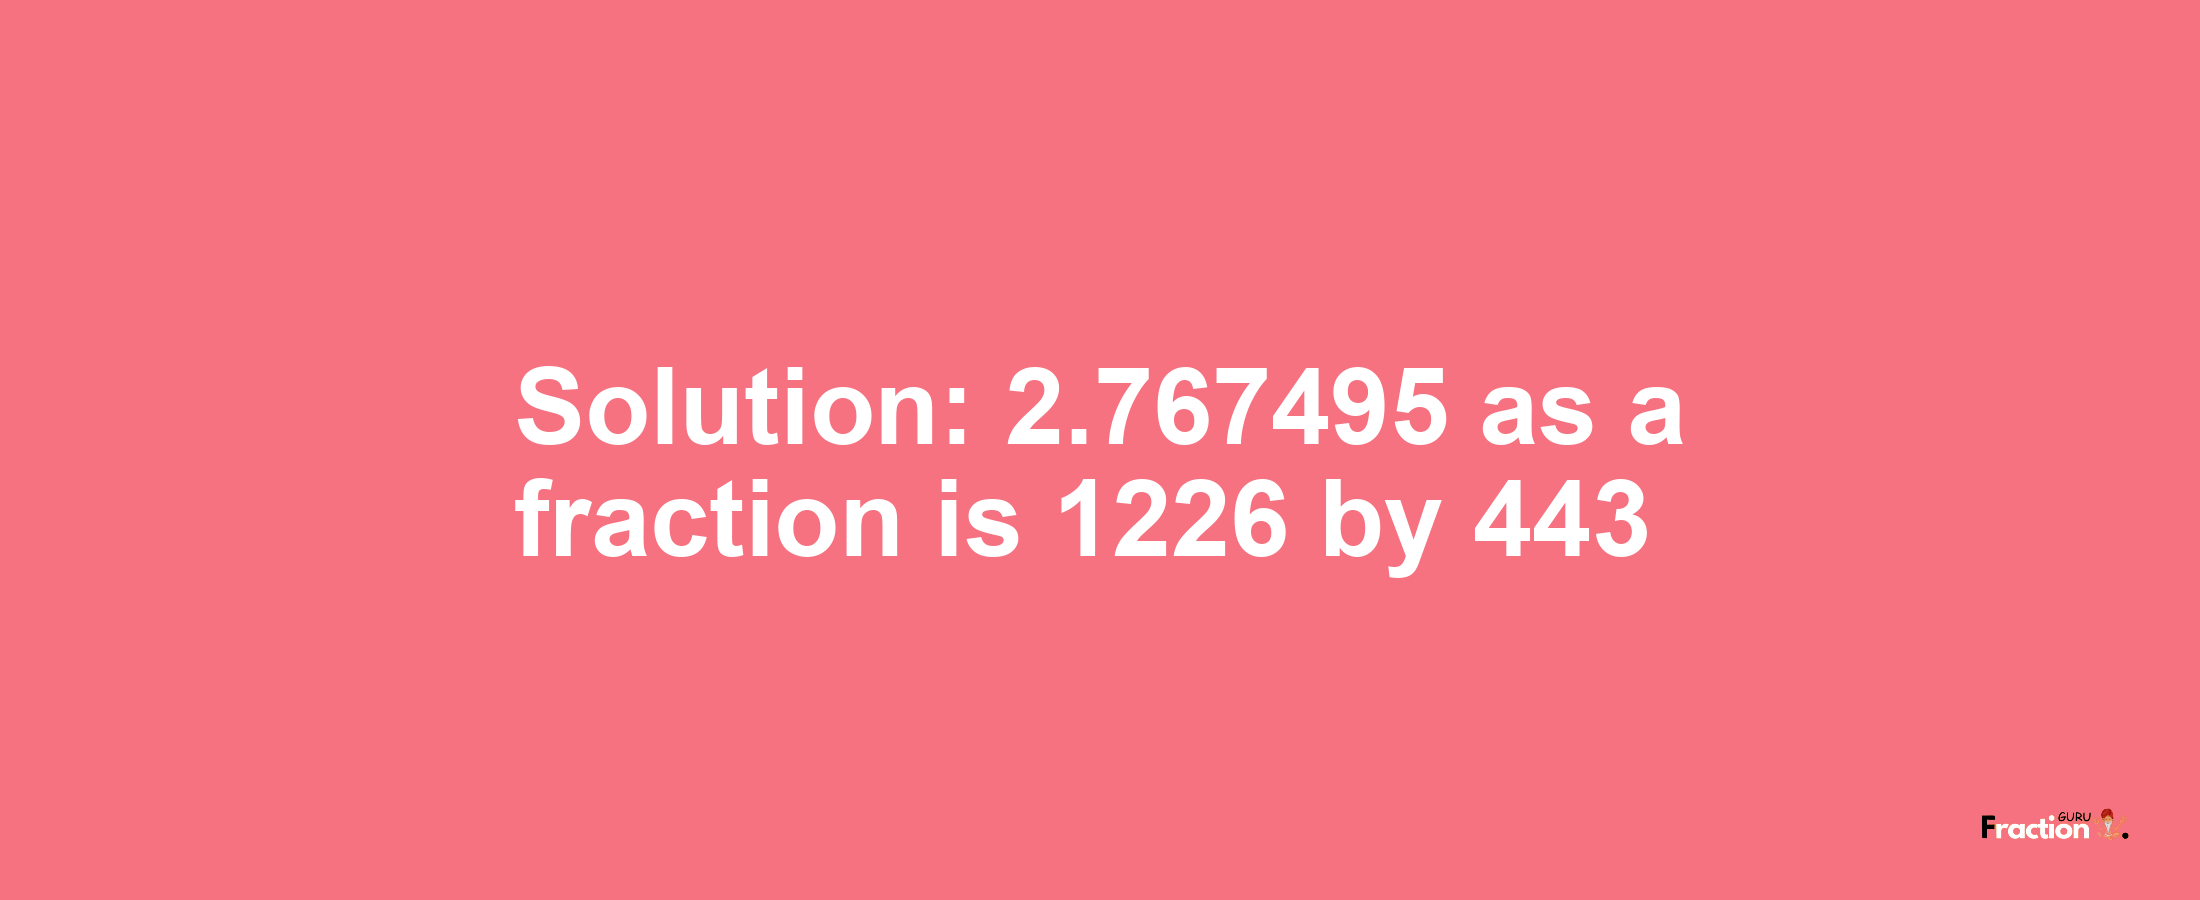 Solution:2.767495 as a fraction is 1226/443